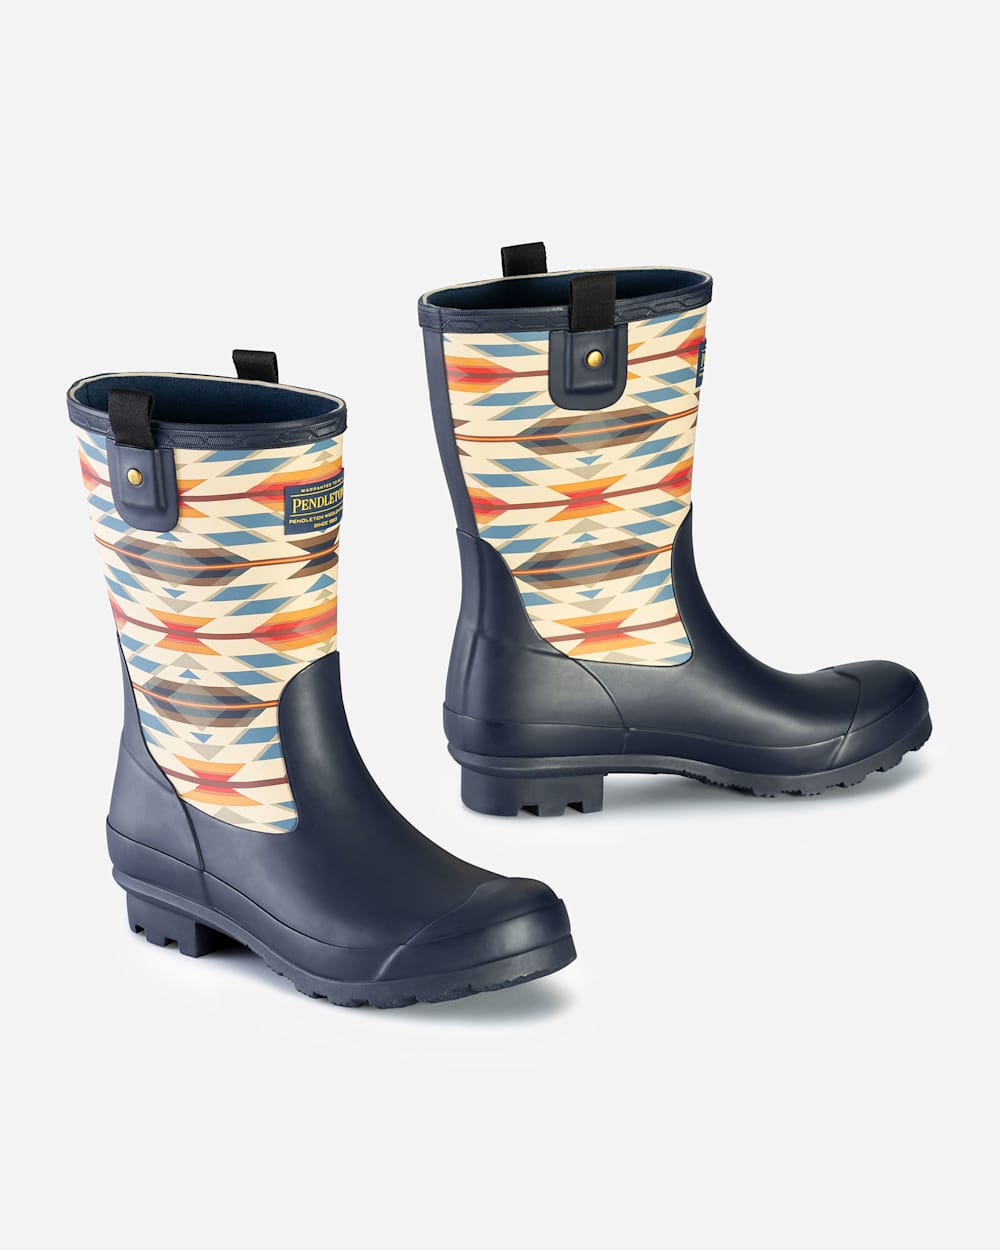 ALTERNATE VIEW OF WOMEN'S WYETH TRAIL MID BOOTS IN NAVY image number 2